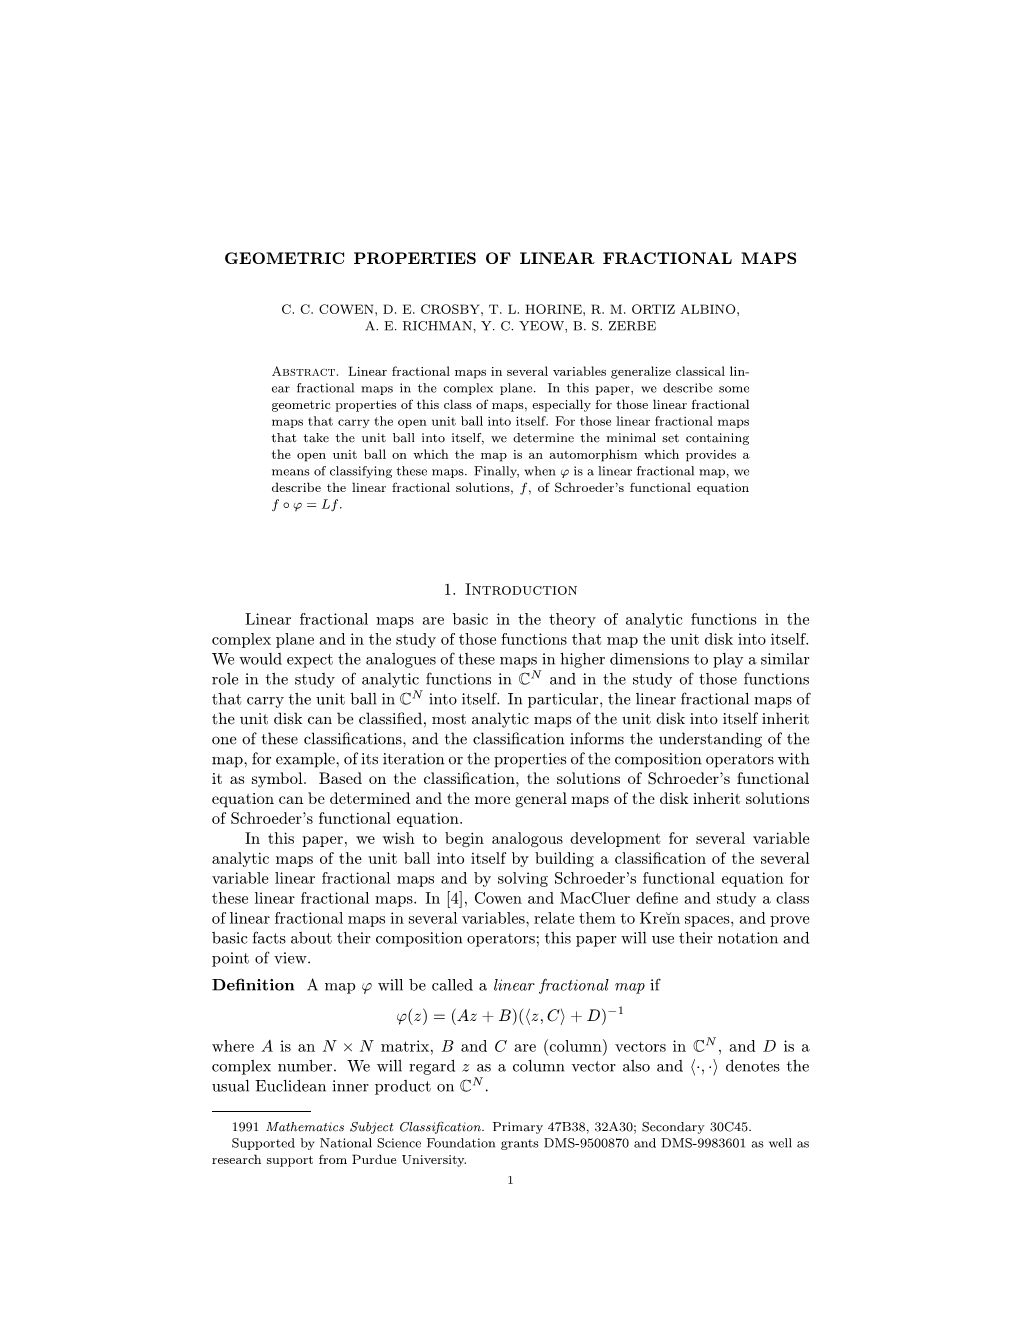 GEOMETRIC PROPERTIES of LINEAR FRACTIONAL MAPS 1. Introduction Linear